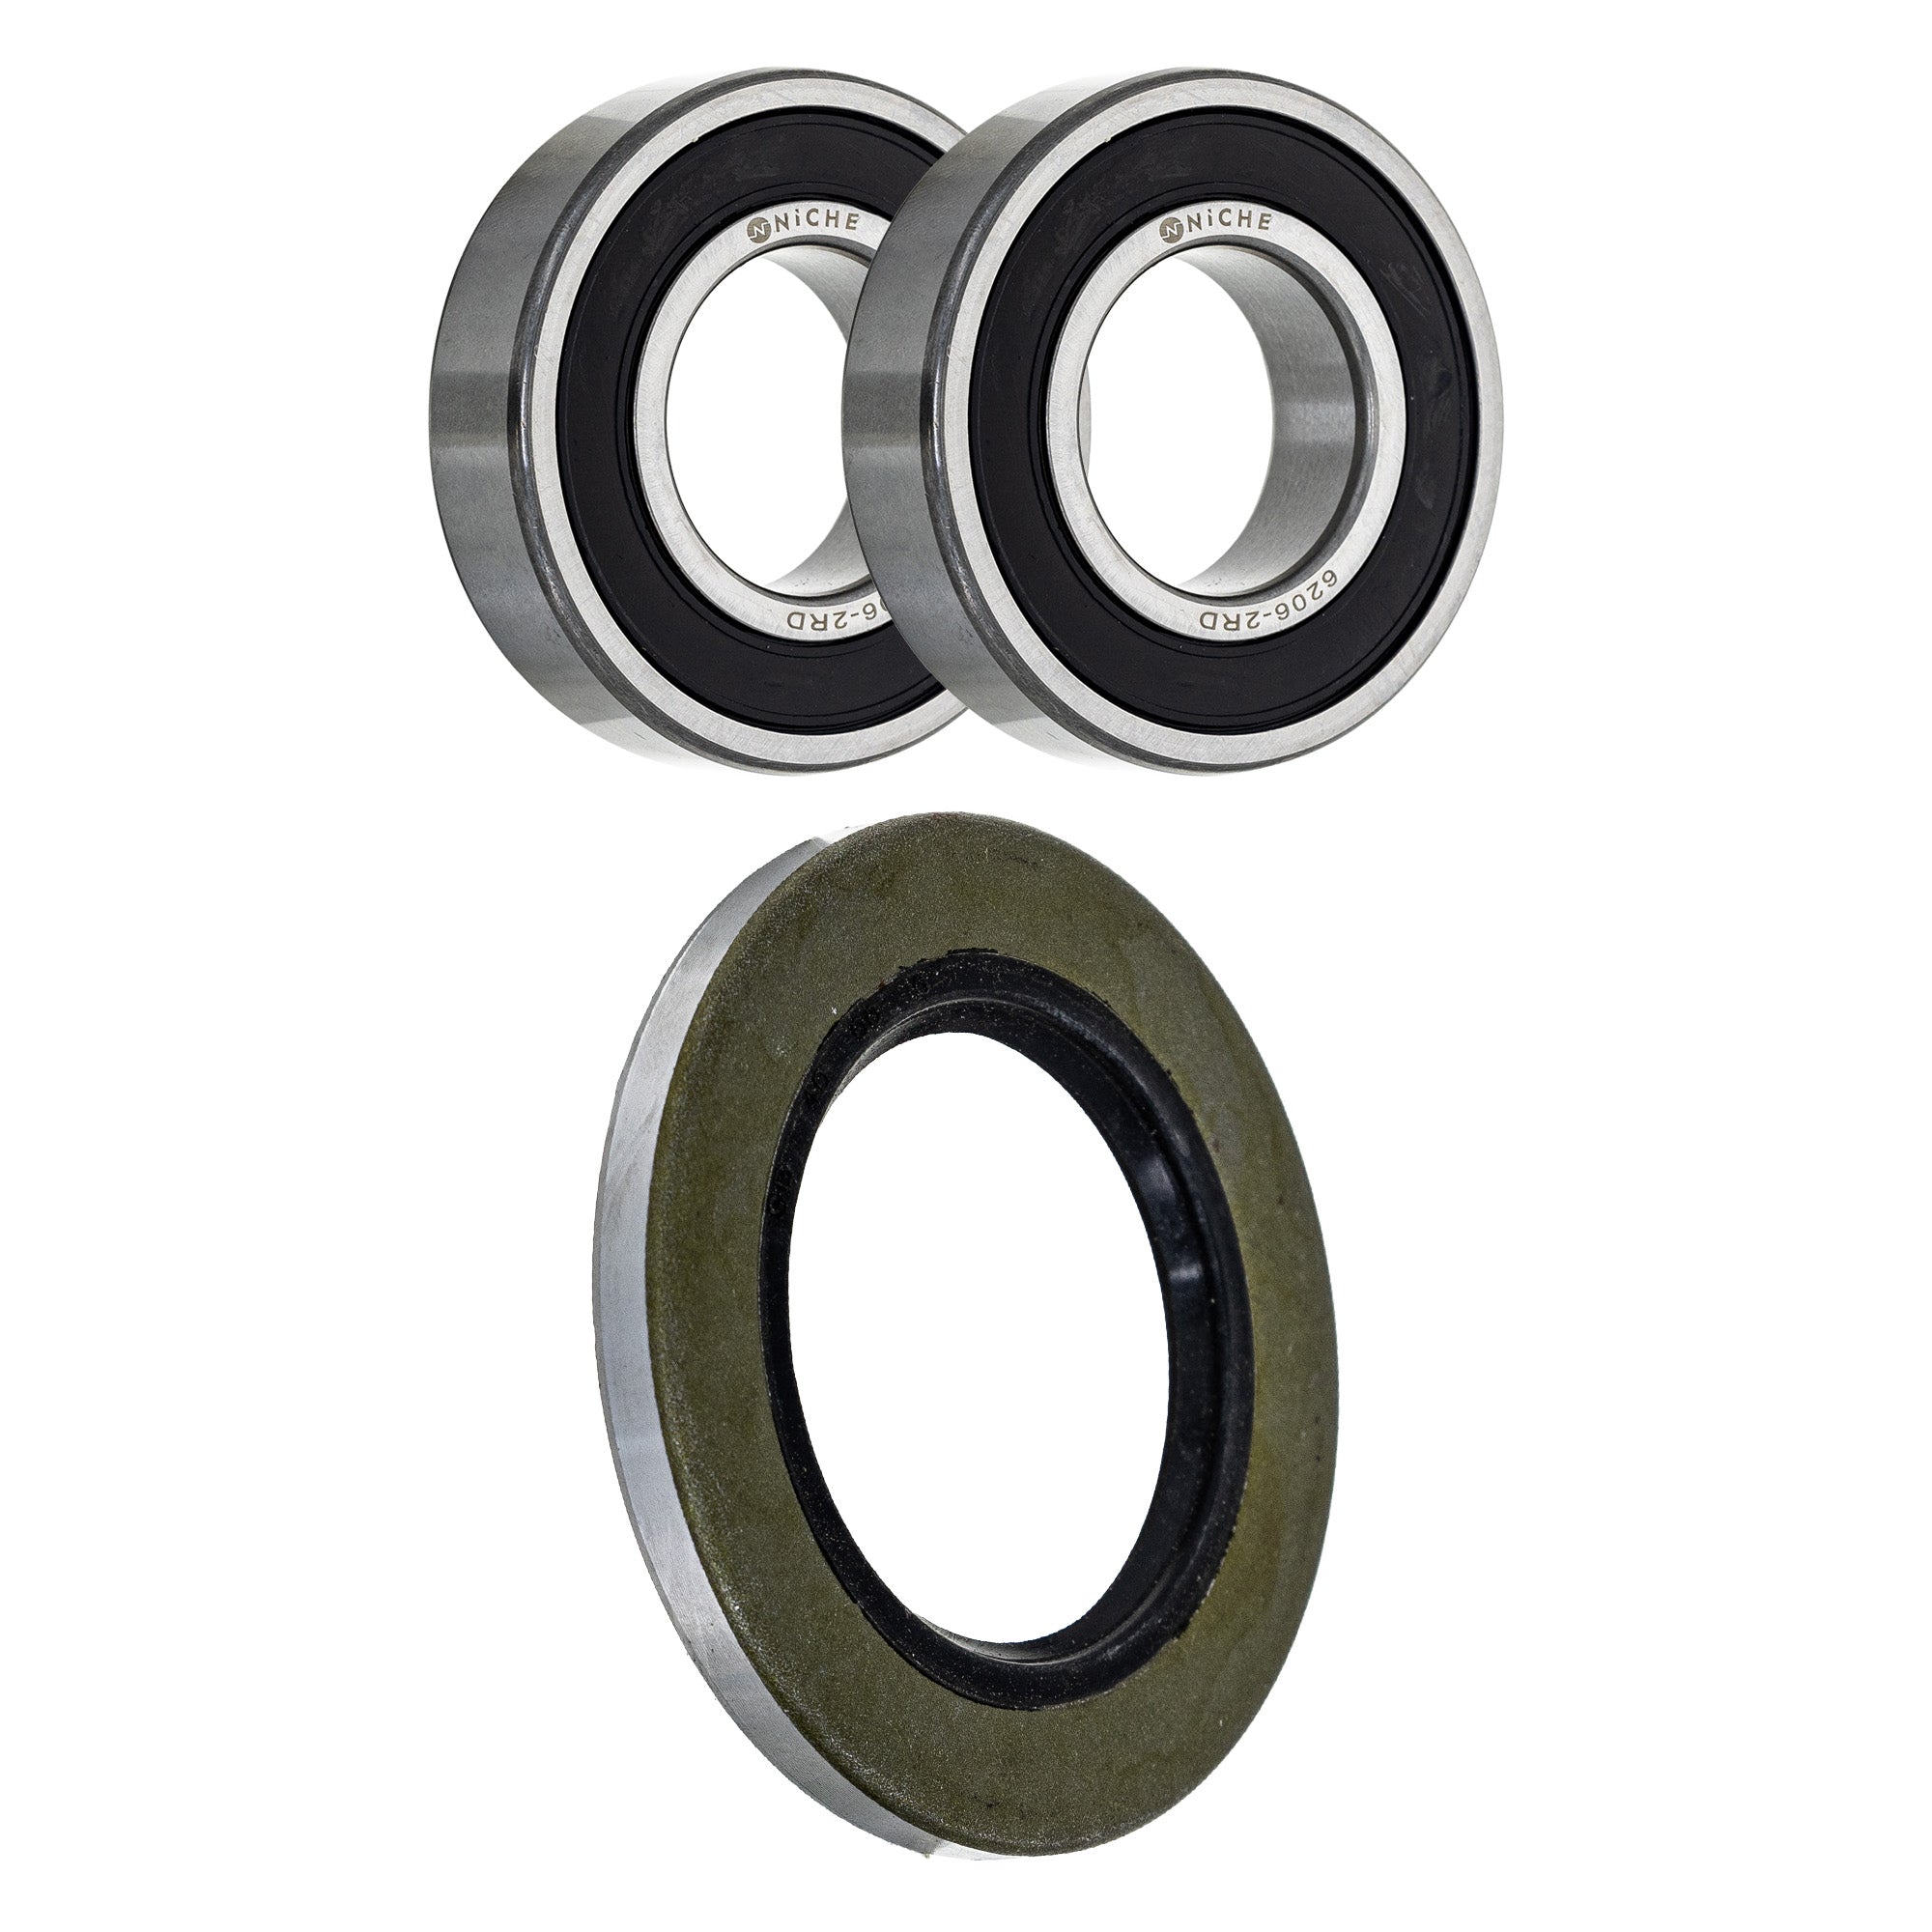 Wheel Bearing Seal Kit for zOTHER Traxter Quest NICHE MK1009185